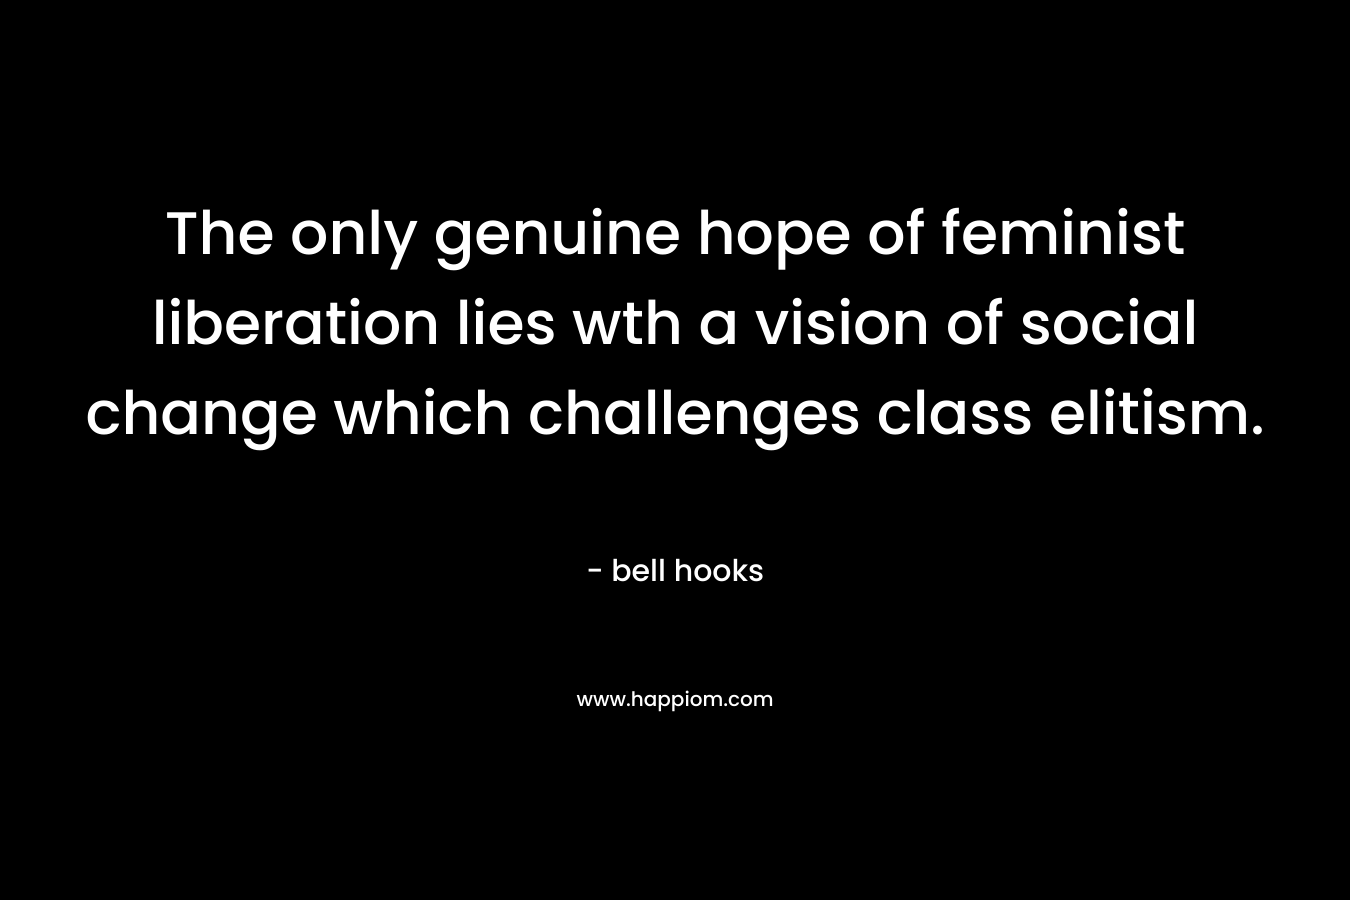 The only genuine hope of feminist liberation lies wth a vision of social change which challenges class elitism. – bell hooks